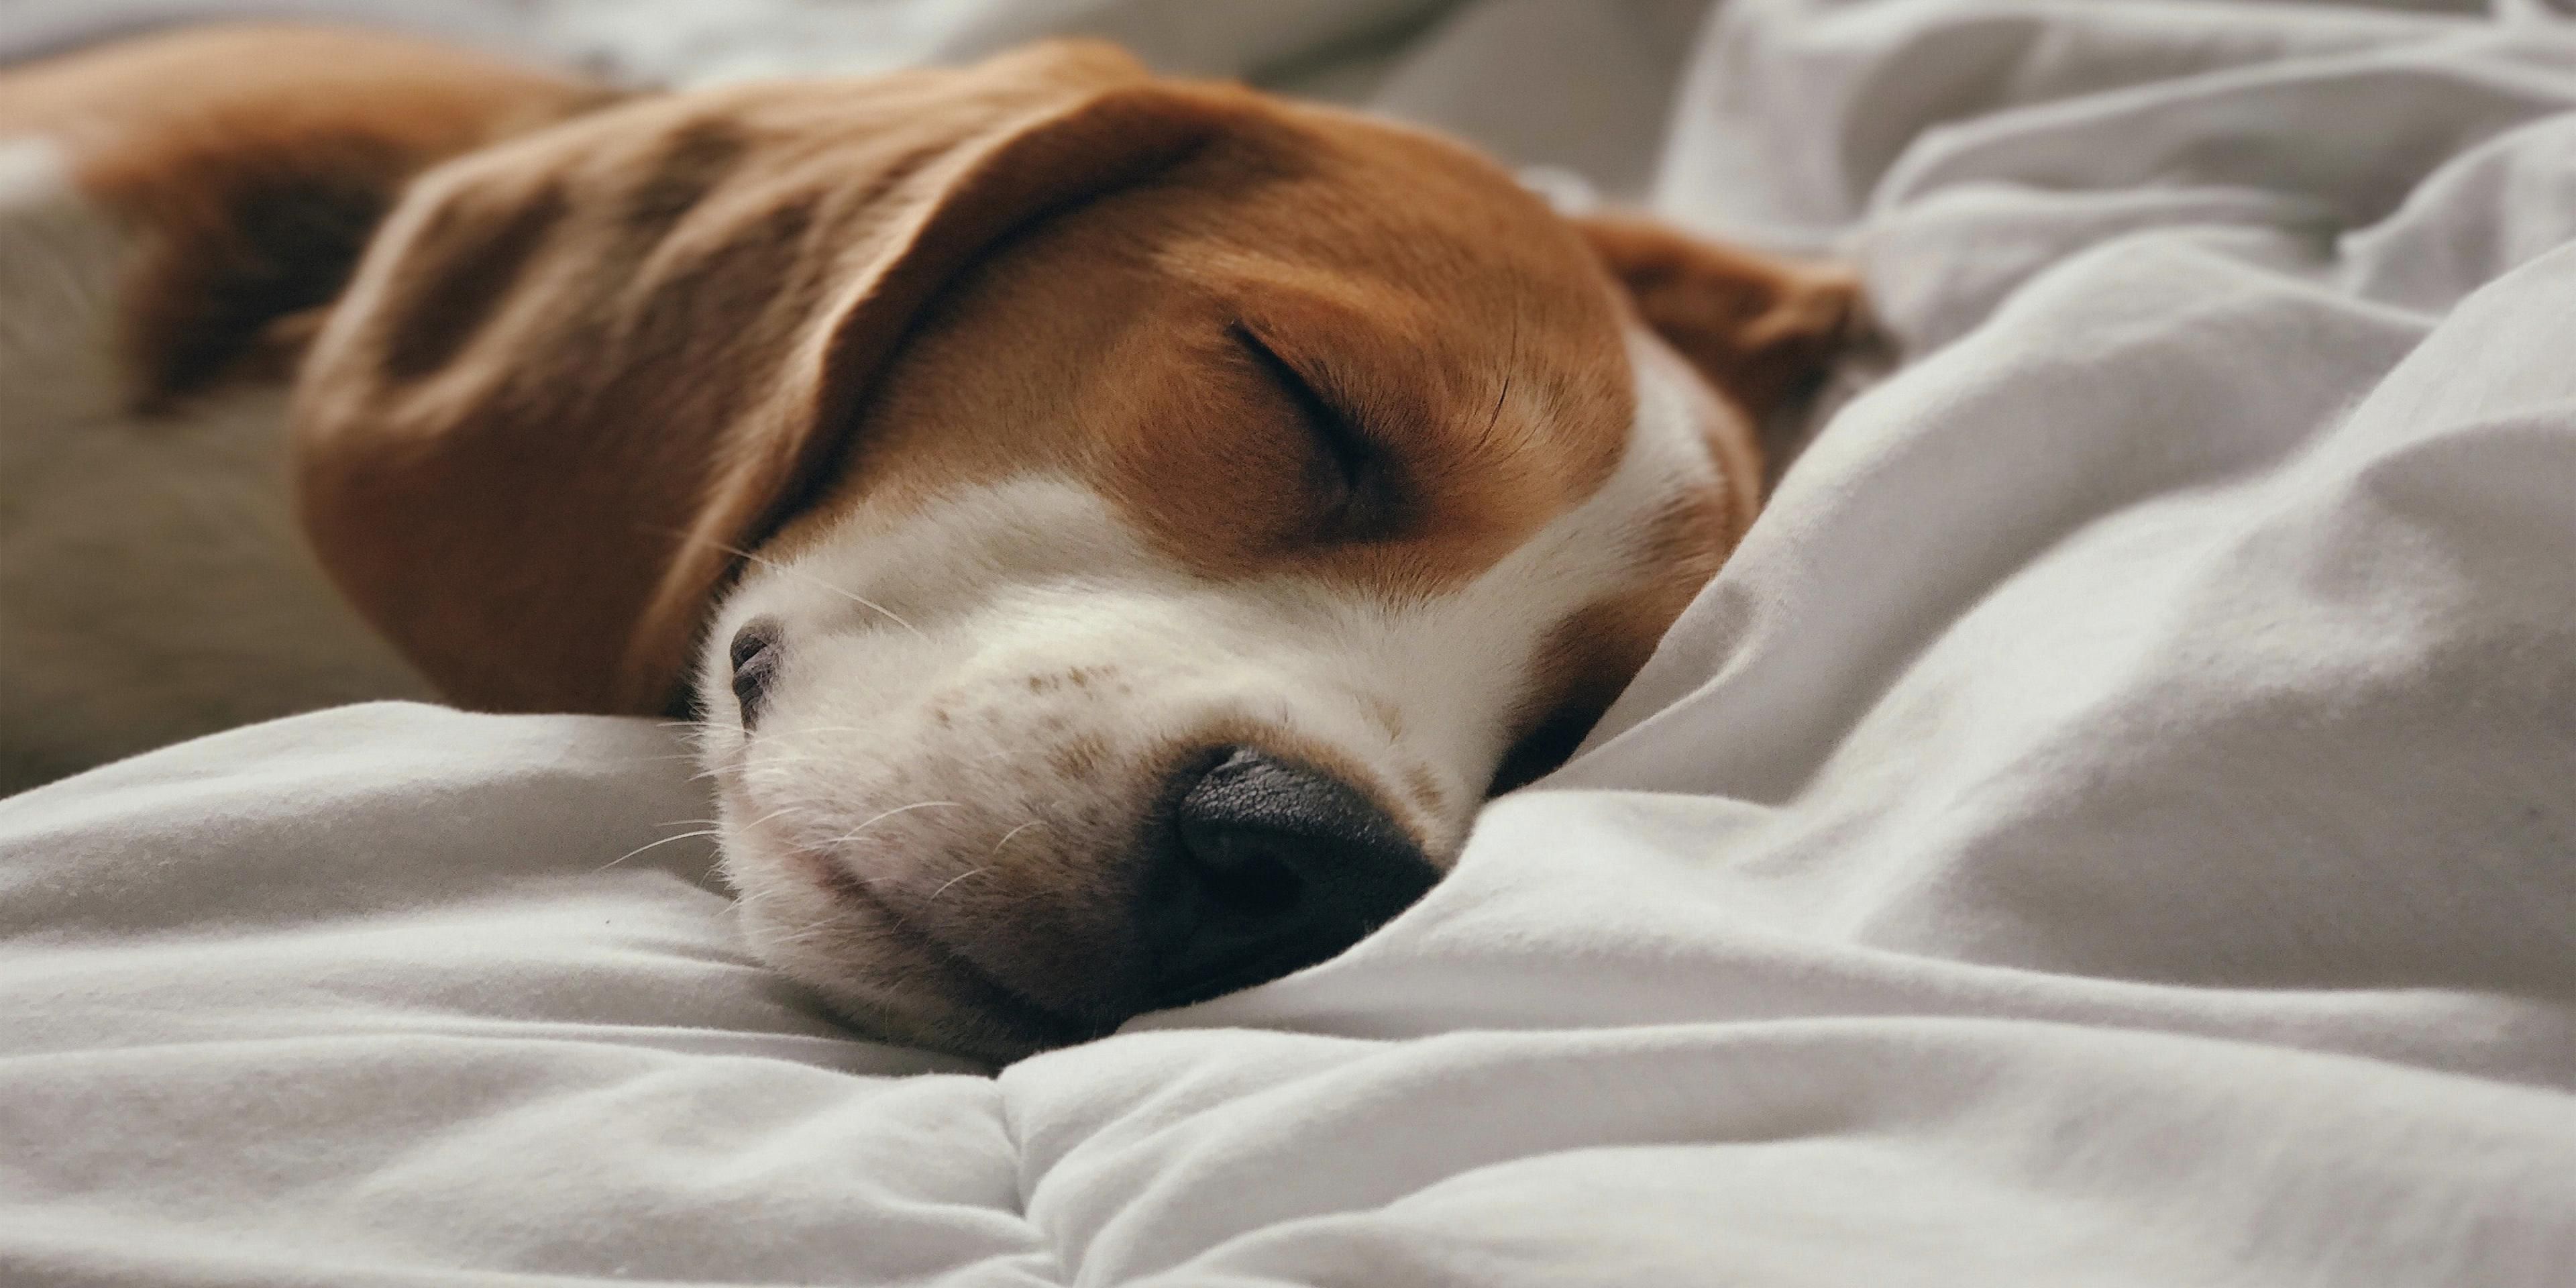 Your pets are welcome for a stay with you too. Please be aware that there is a nonrefundable pet cleaning fee of $150 CDN per stay that will be charged to your account to cover the cost of additional and necessary cleaning in preparation for our next guest. 